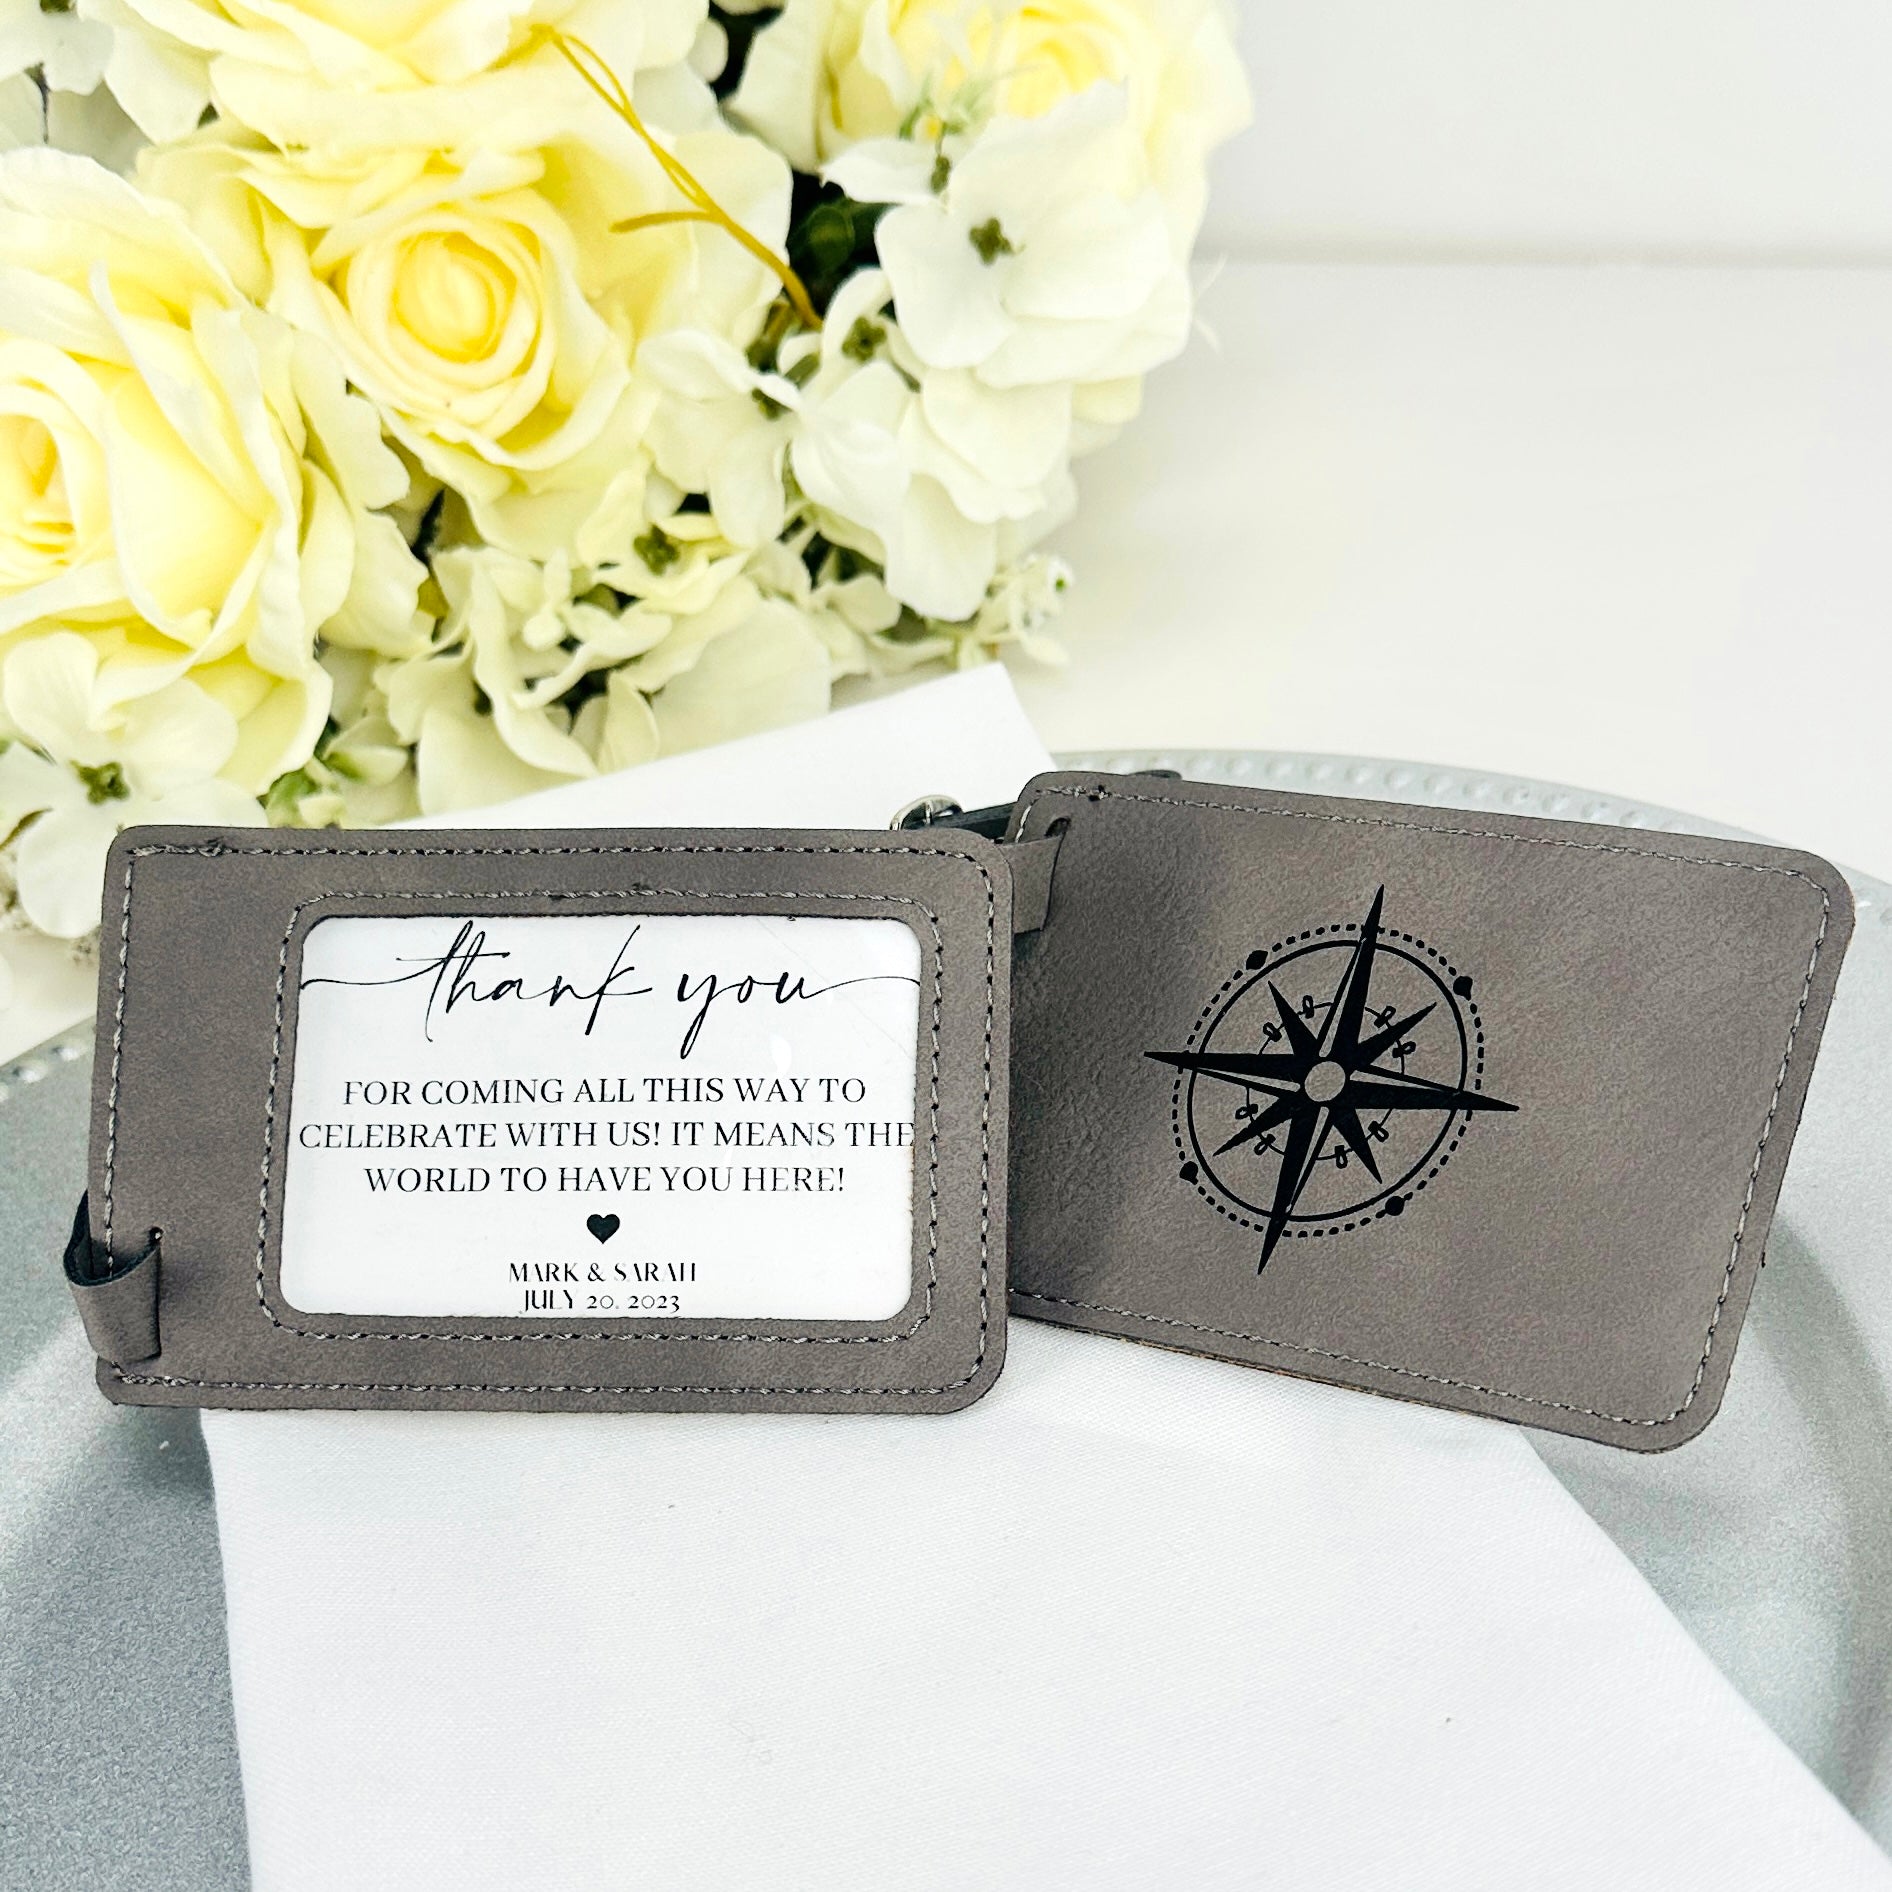 All Mine! Personalized Luggage Tag 2 Pc Set